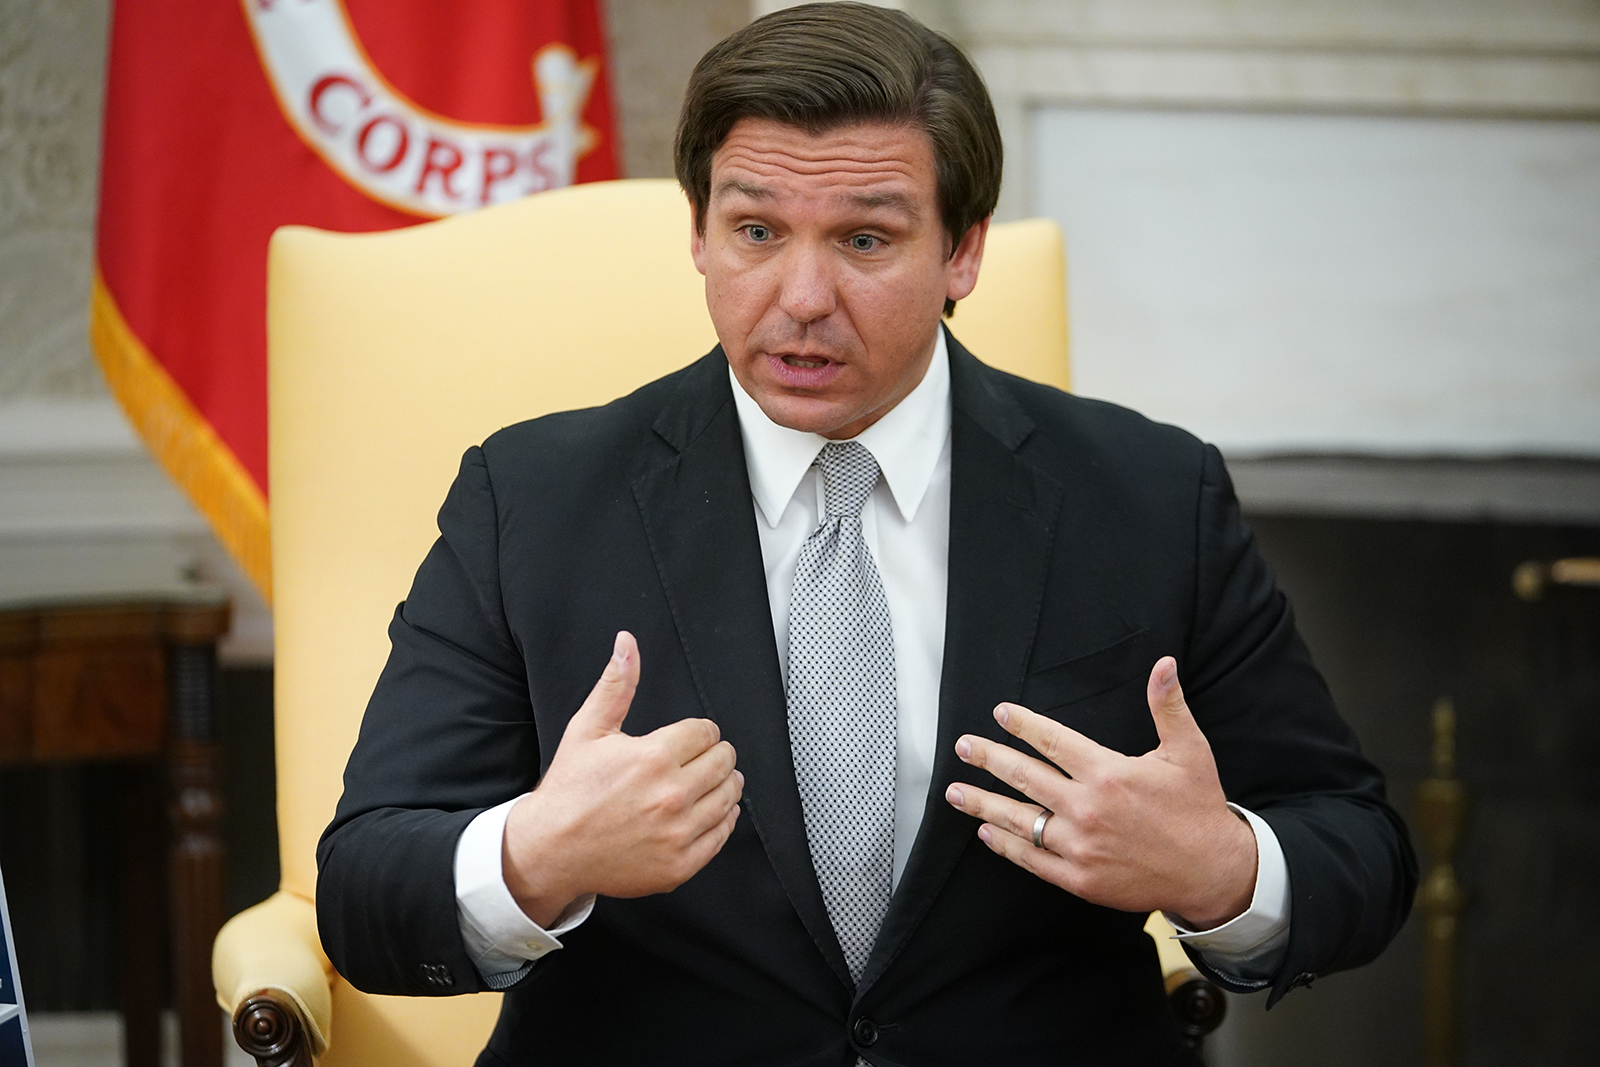 Florida Governor Ron DeSantis speaks during a meeting with President Donald Trump in the Oval Office of the White House in Washington, DC on April 28.